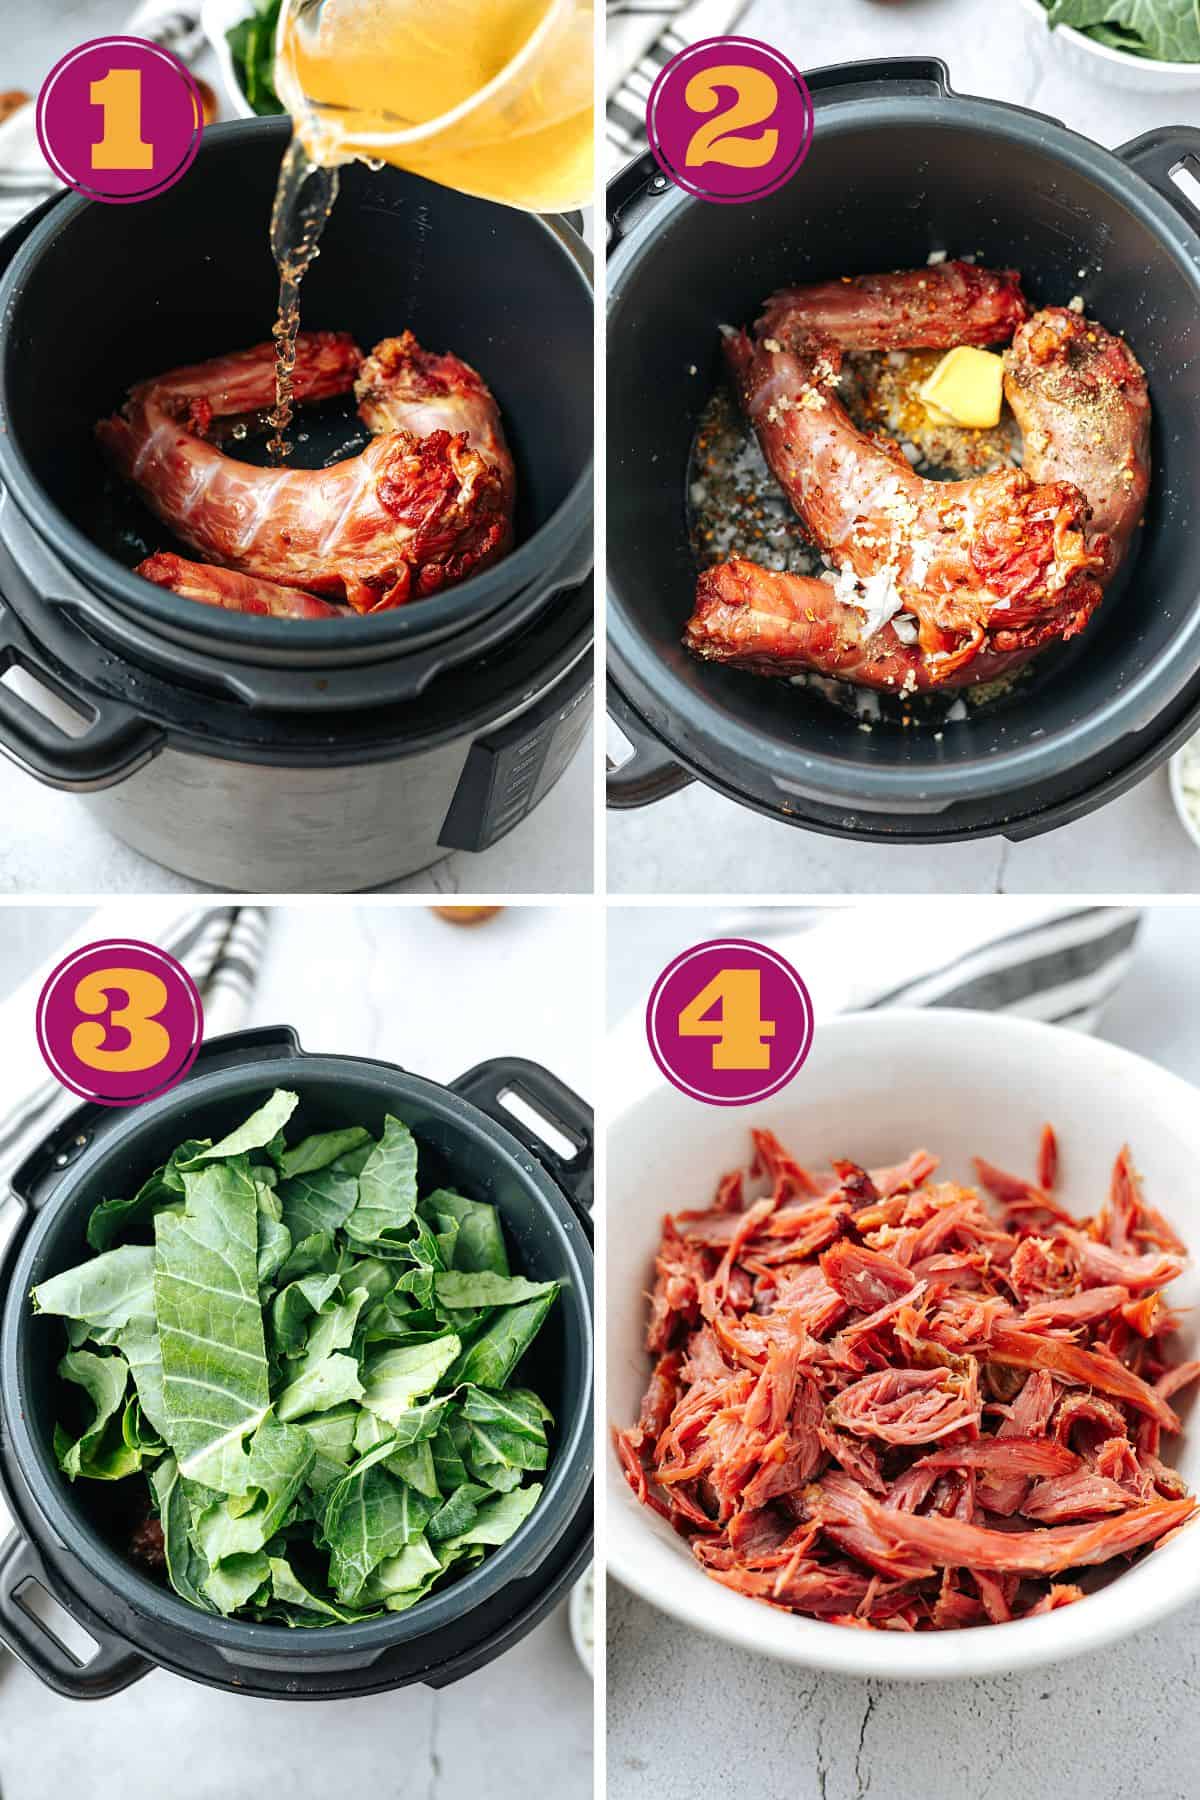 step-by-step instructions for how to cook Collard Greens using a pressure cooker